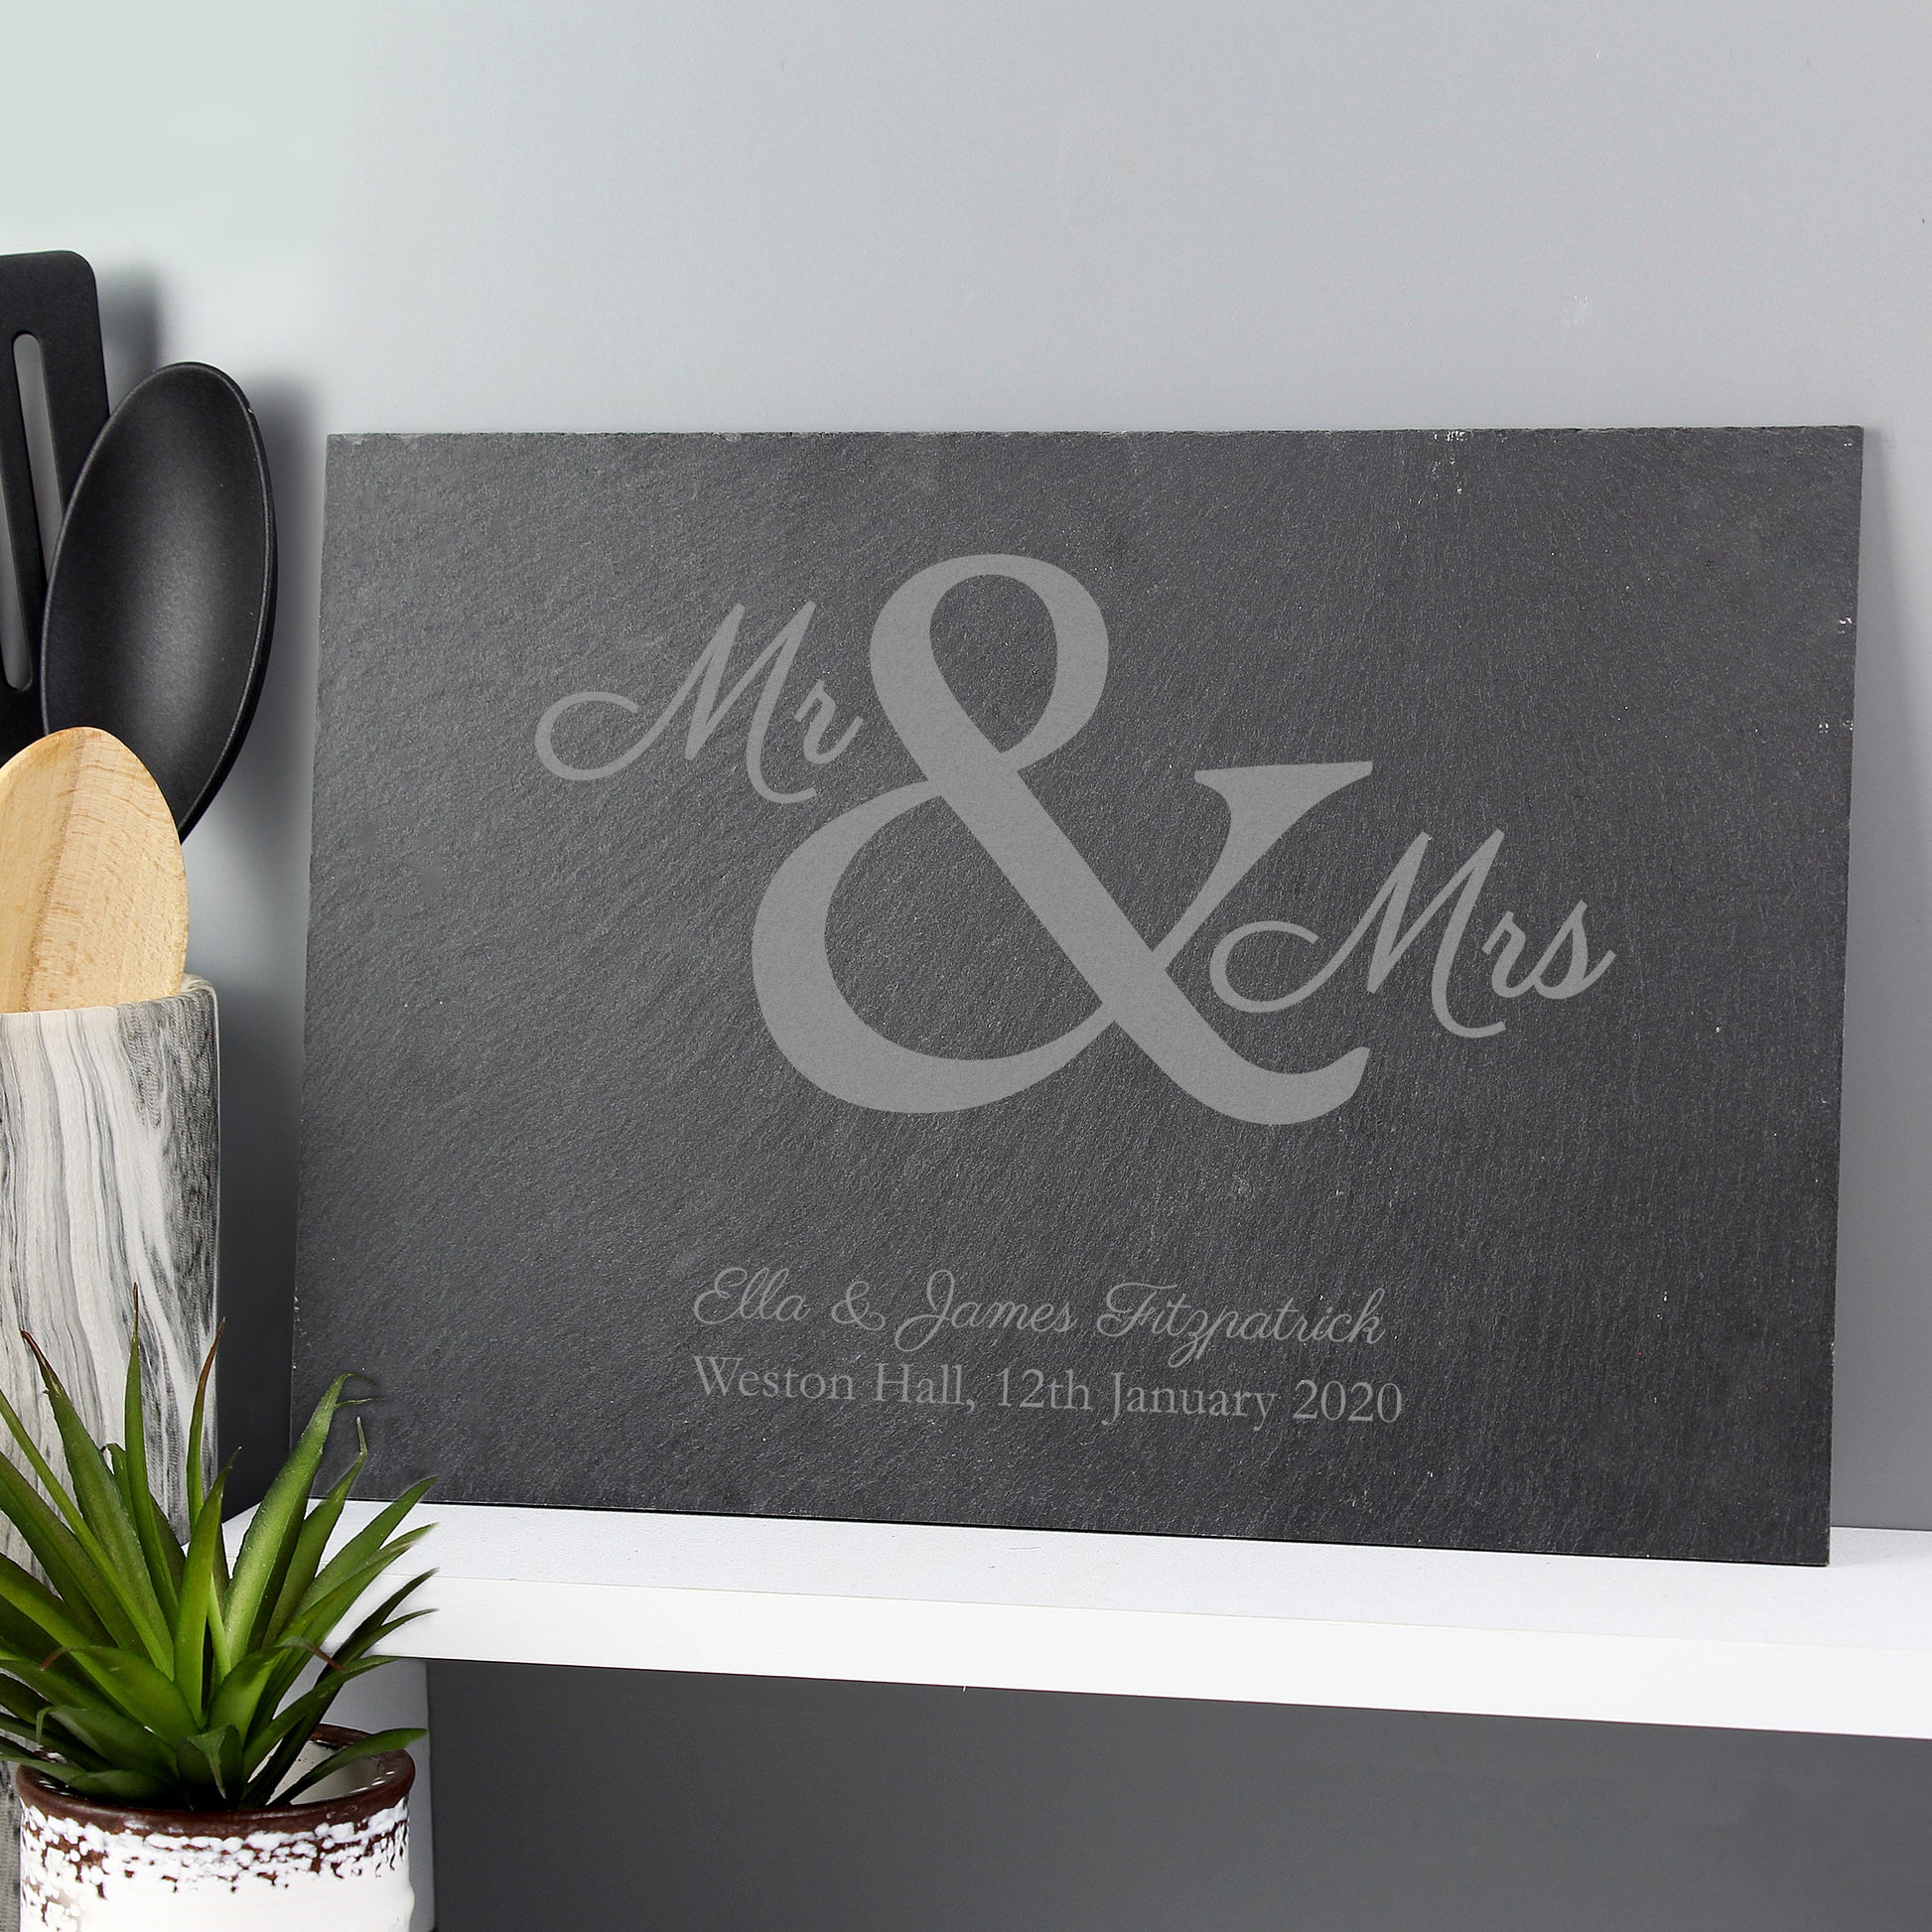 a slate board or placemat etched with mr & mrs with wedding details below.